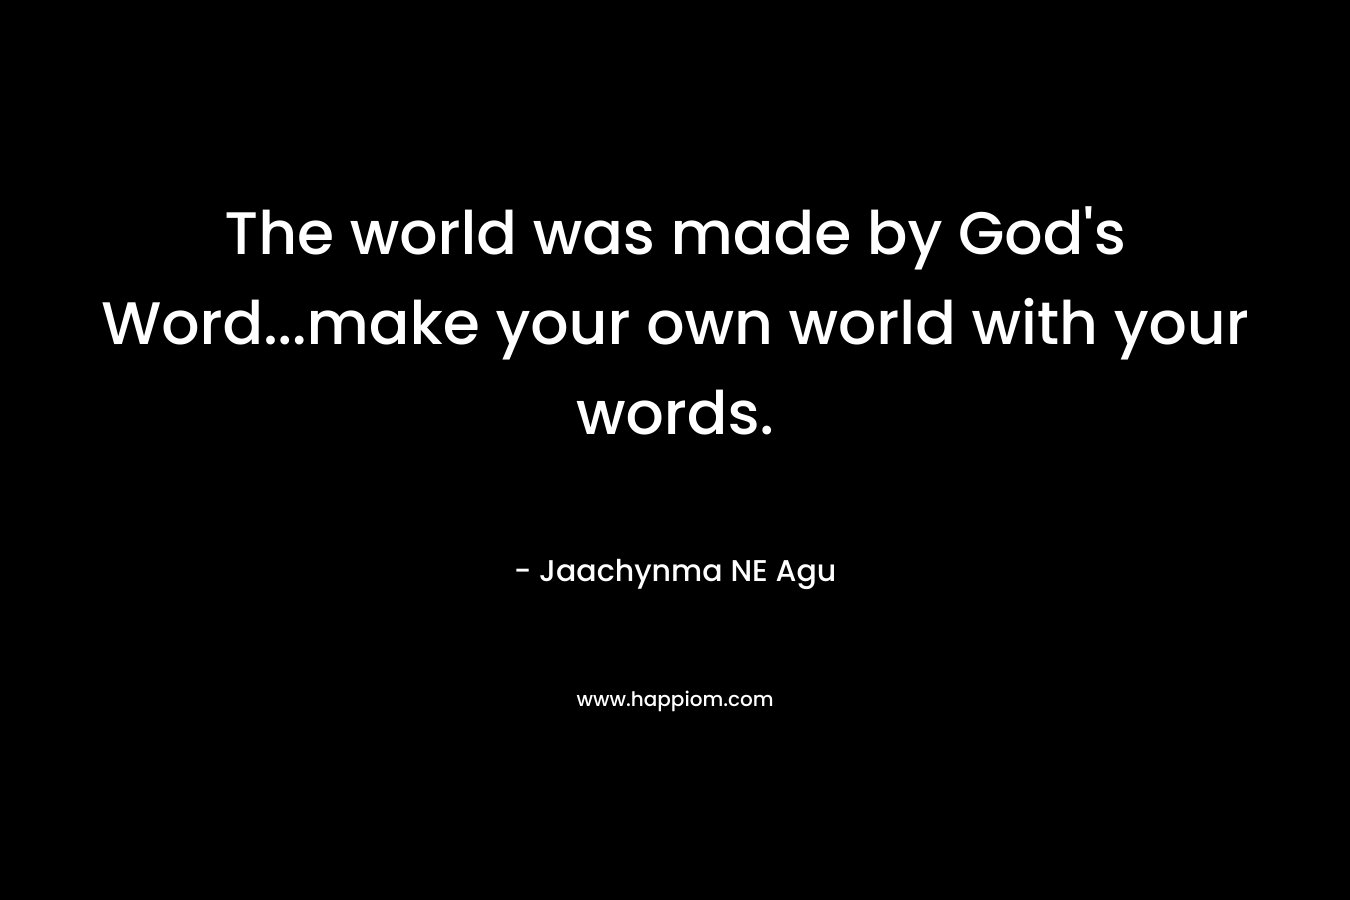 The world was made by God’s Word…make your own world with your words. – Jaachynma NE Agu